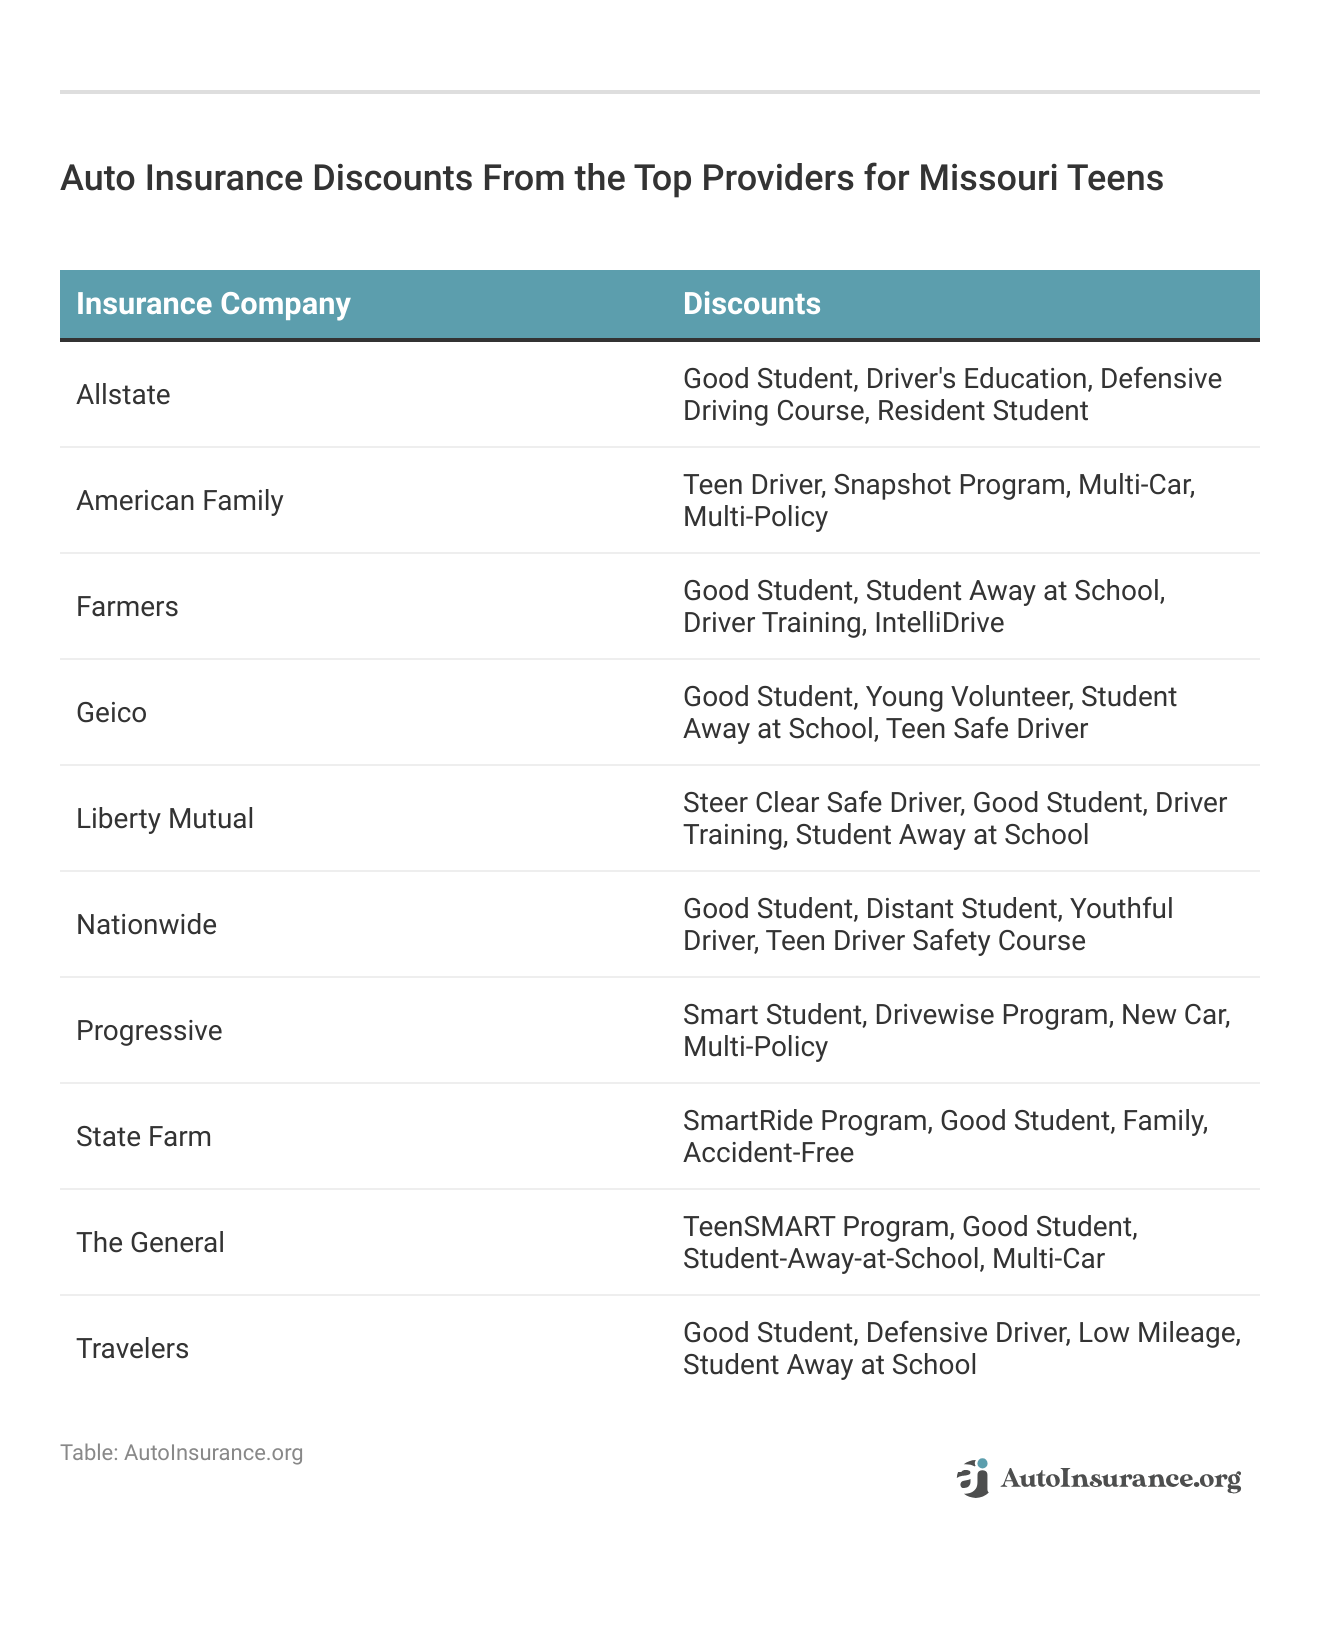 <h3>Auto Insurance Discounts From the Top Providers for Missouri Teens</h3>